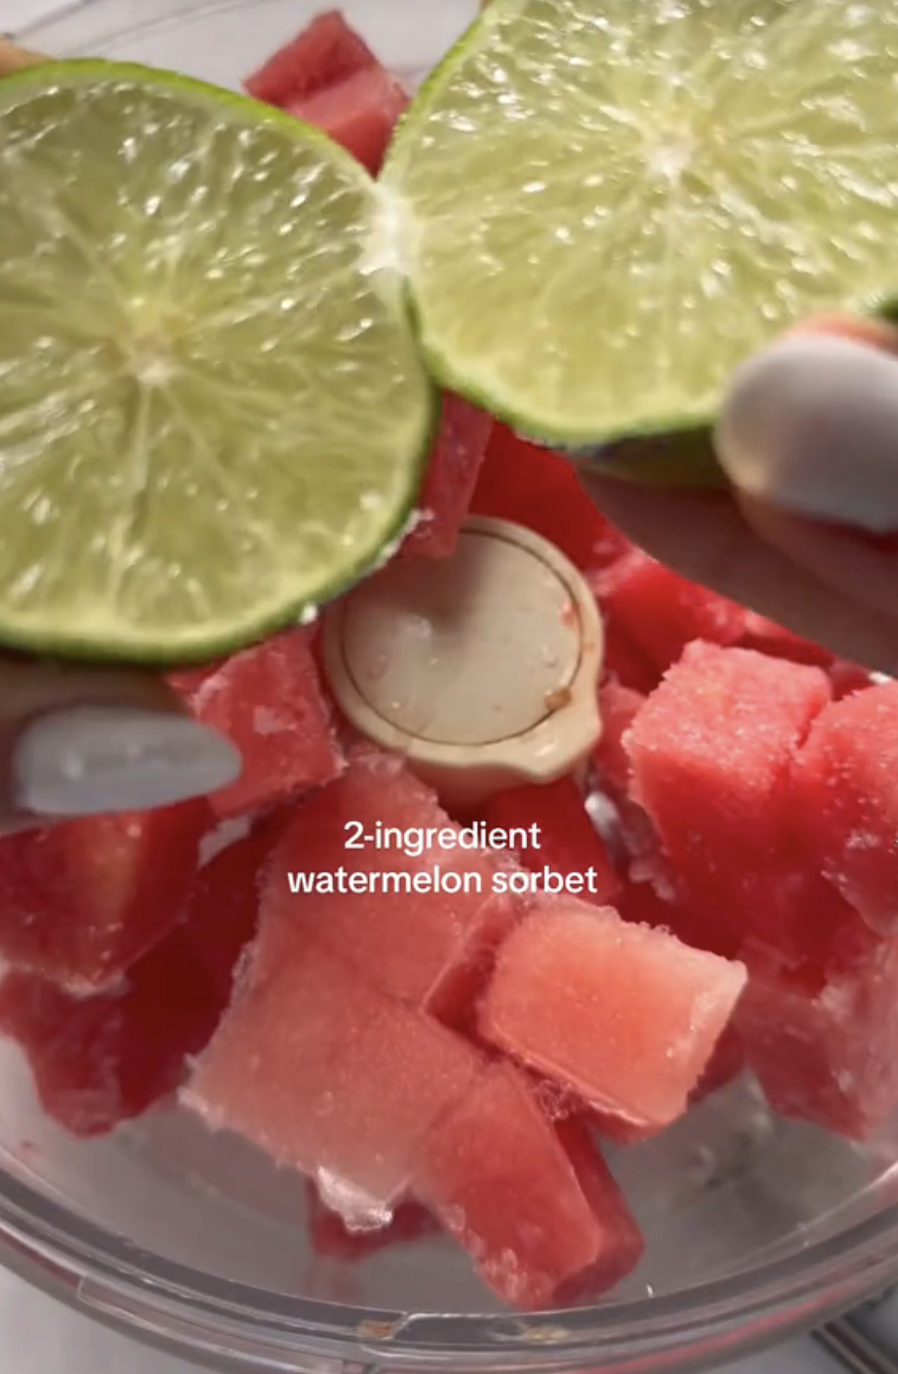 Frozen watermelon chunks in a food processor and hands squeezing a lime into the bowl